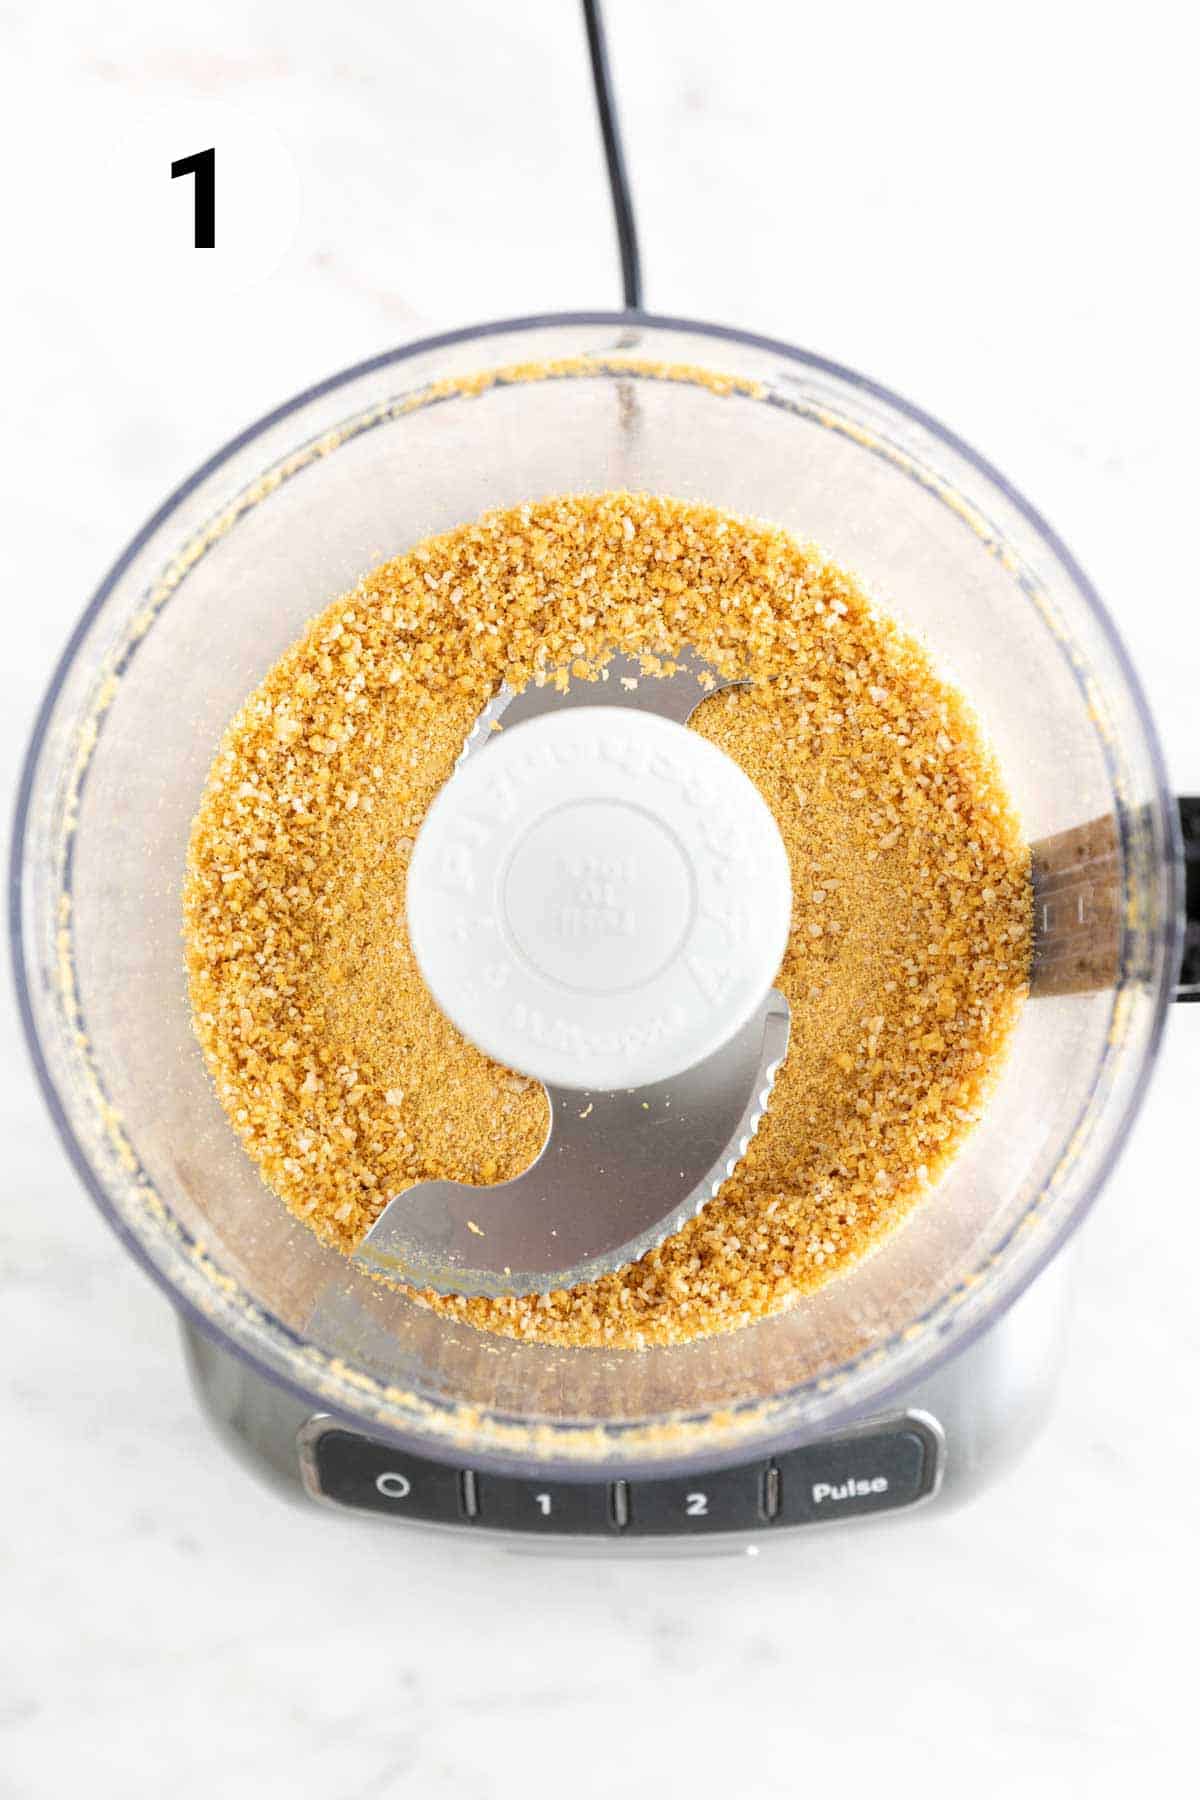 Nutritional yeast, pine nuts, garlic, and salt blended in a food processor.